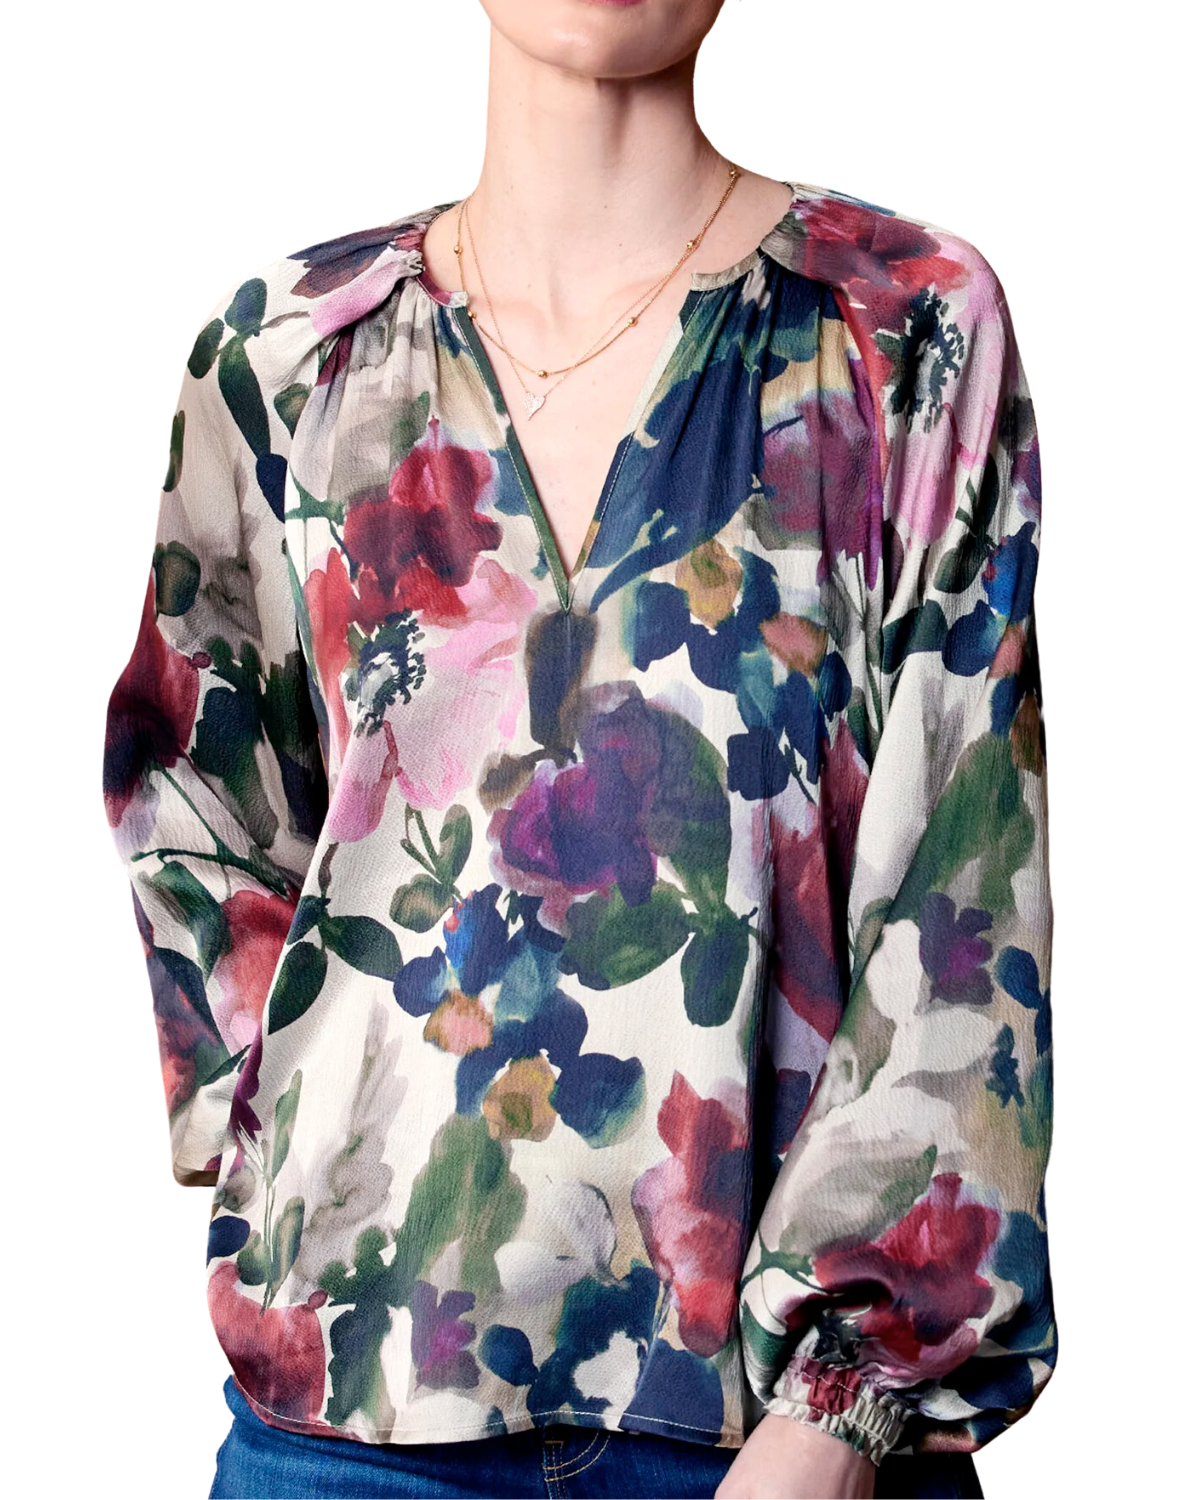 Go Foldover Printed Top (Wine/Roses)